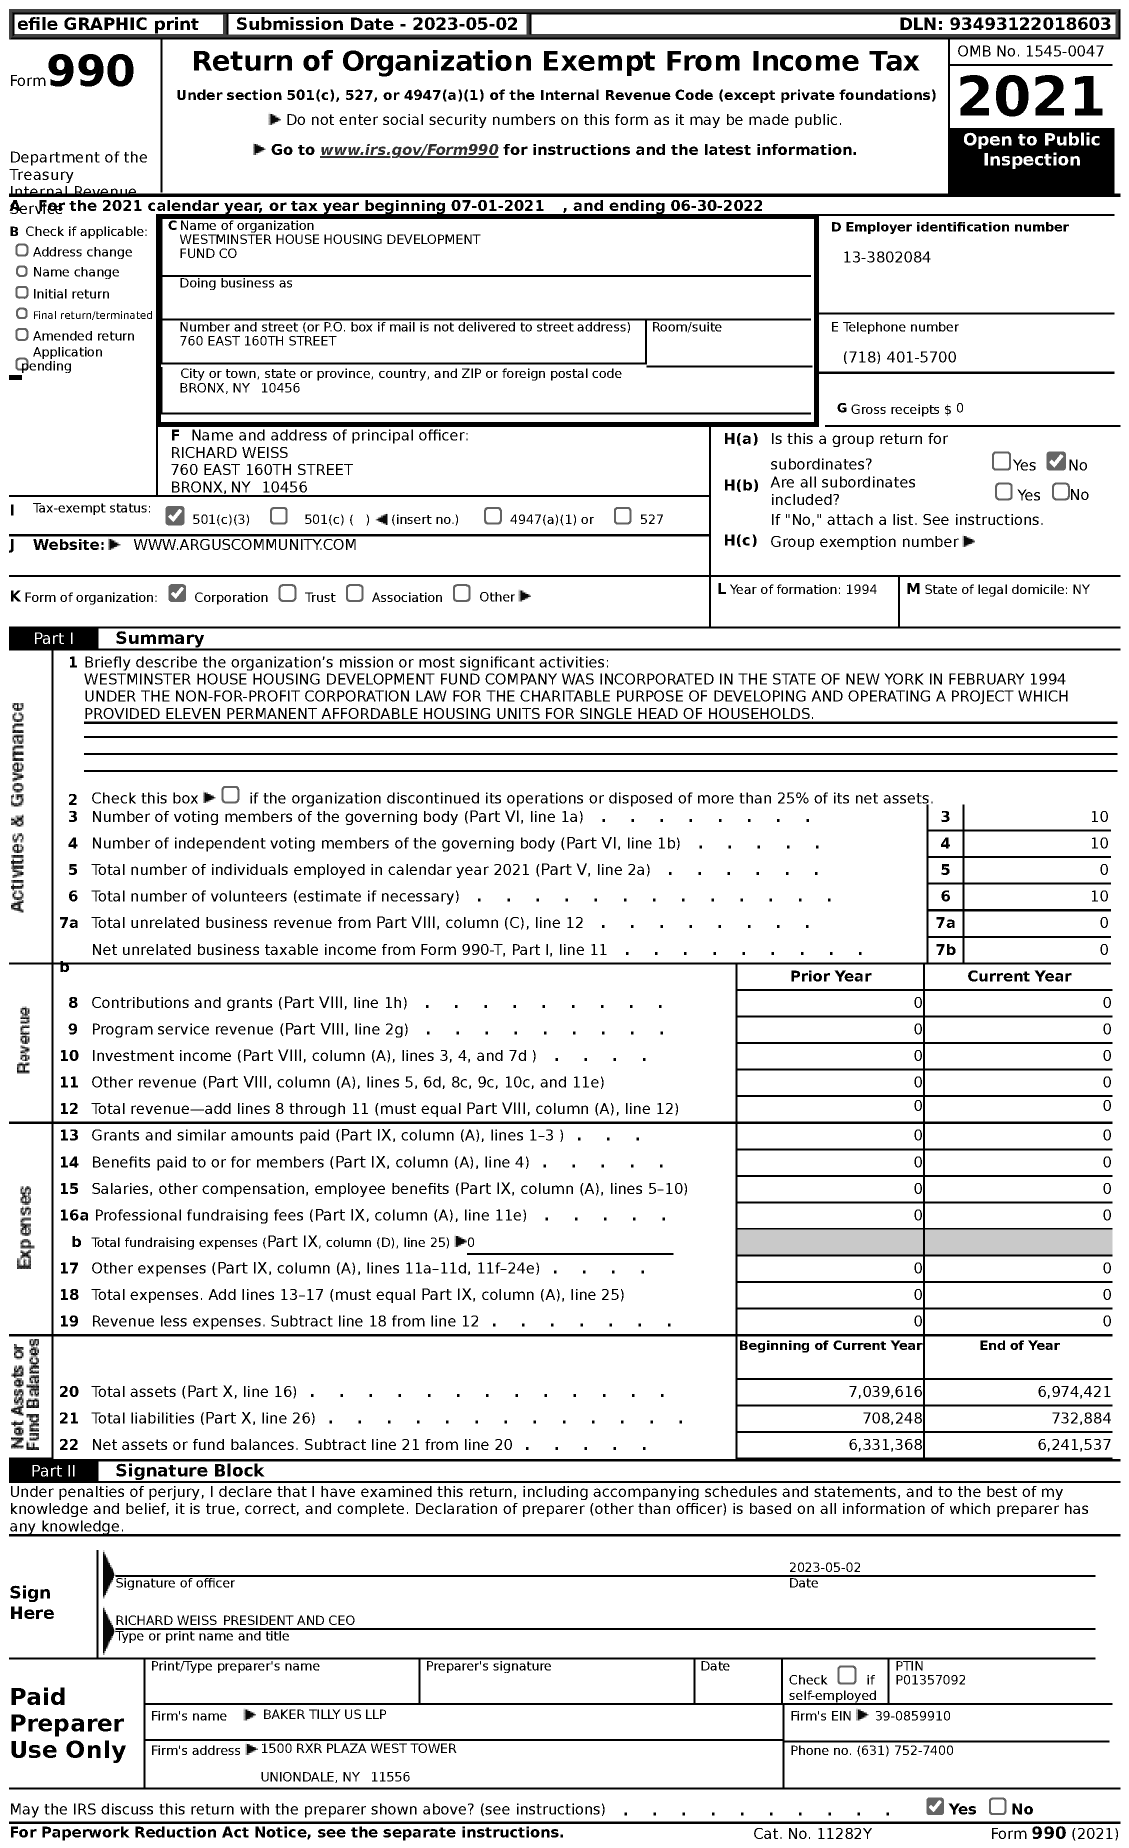 Image of first page of 2021 Form 990 for Westminster House Housing Development Fund Company